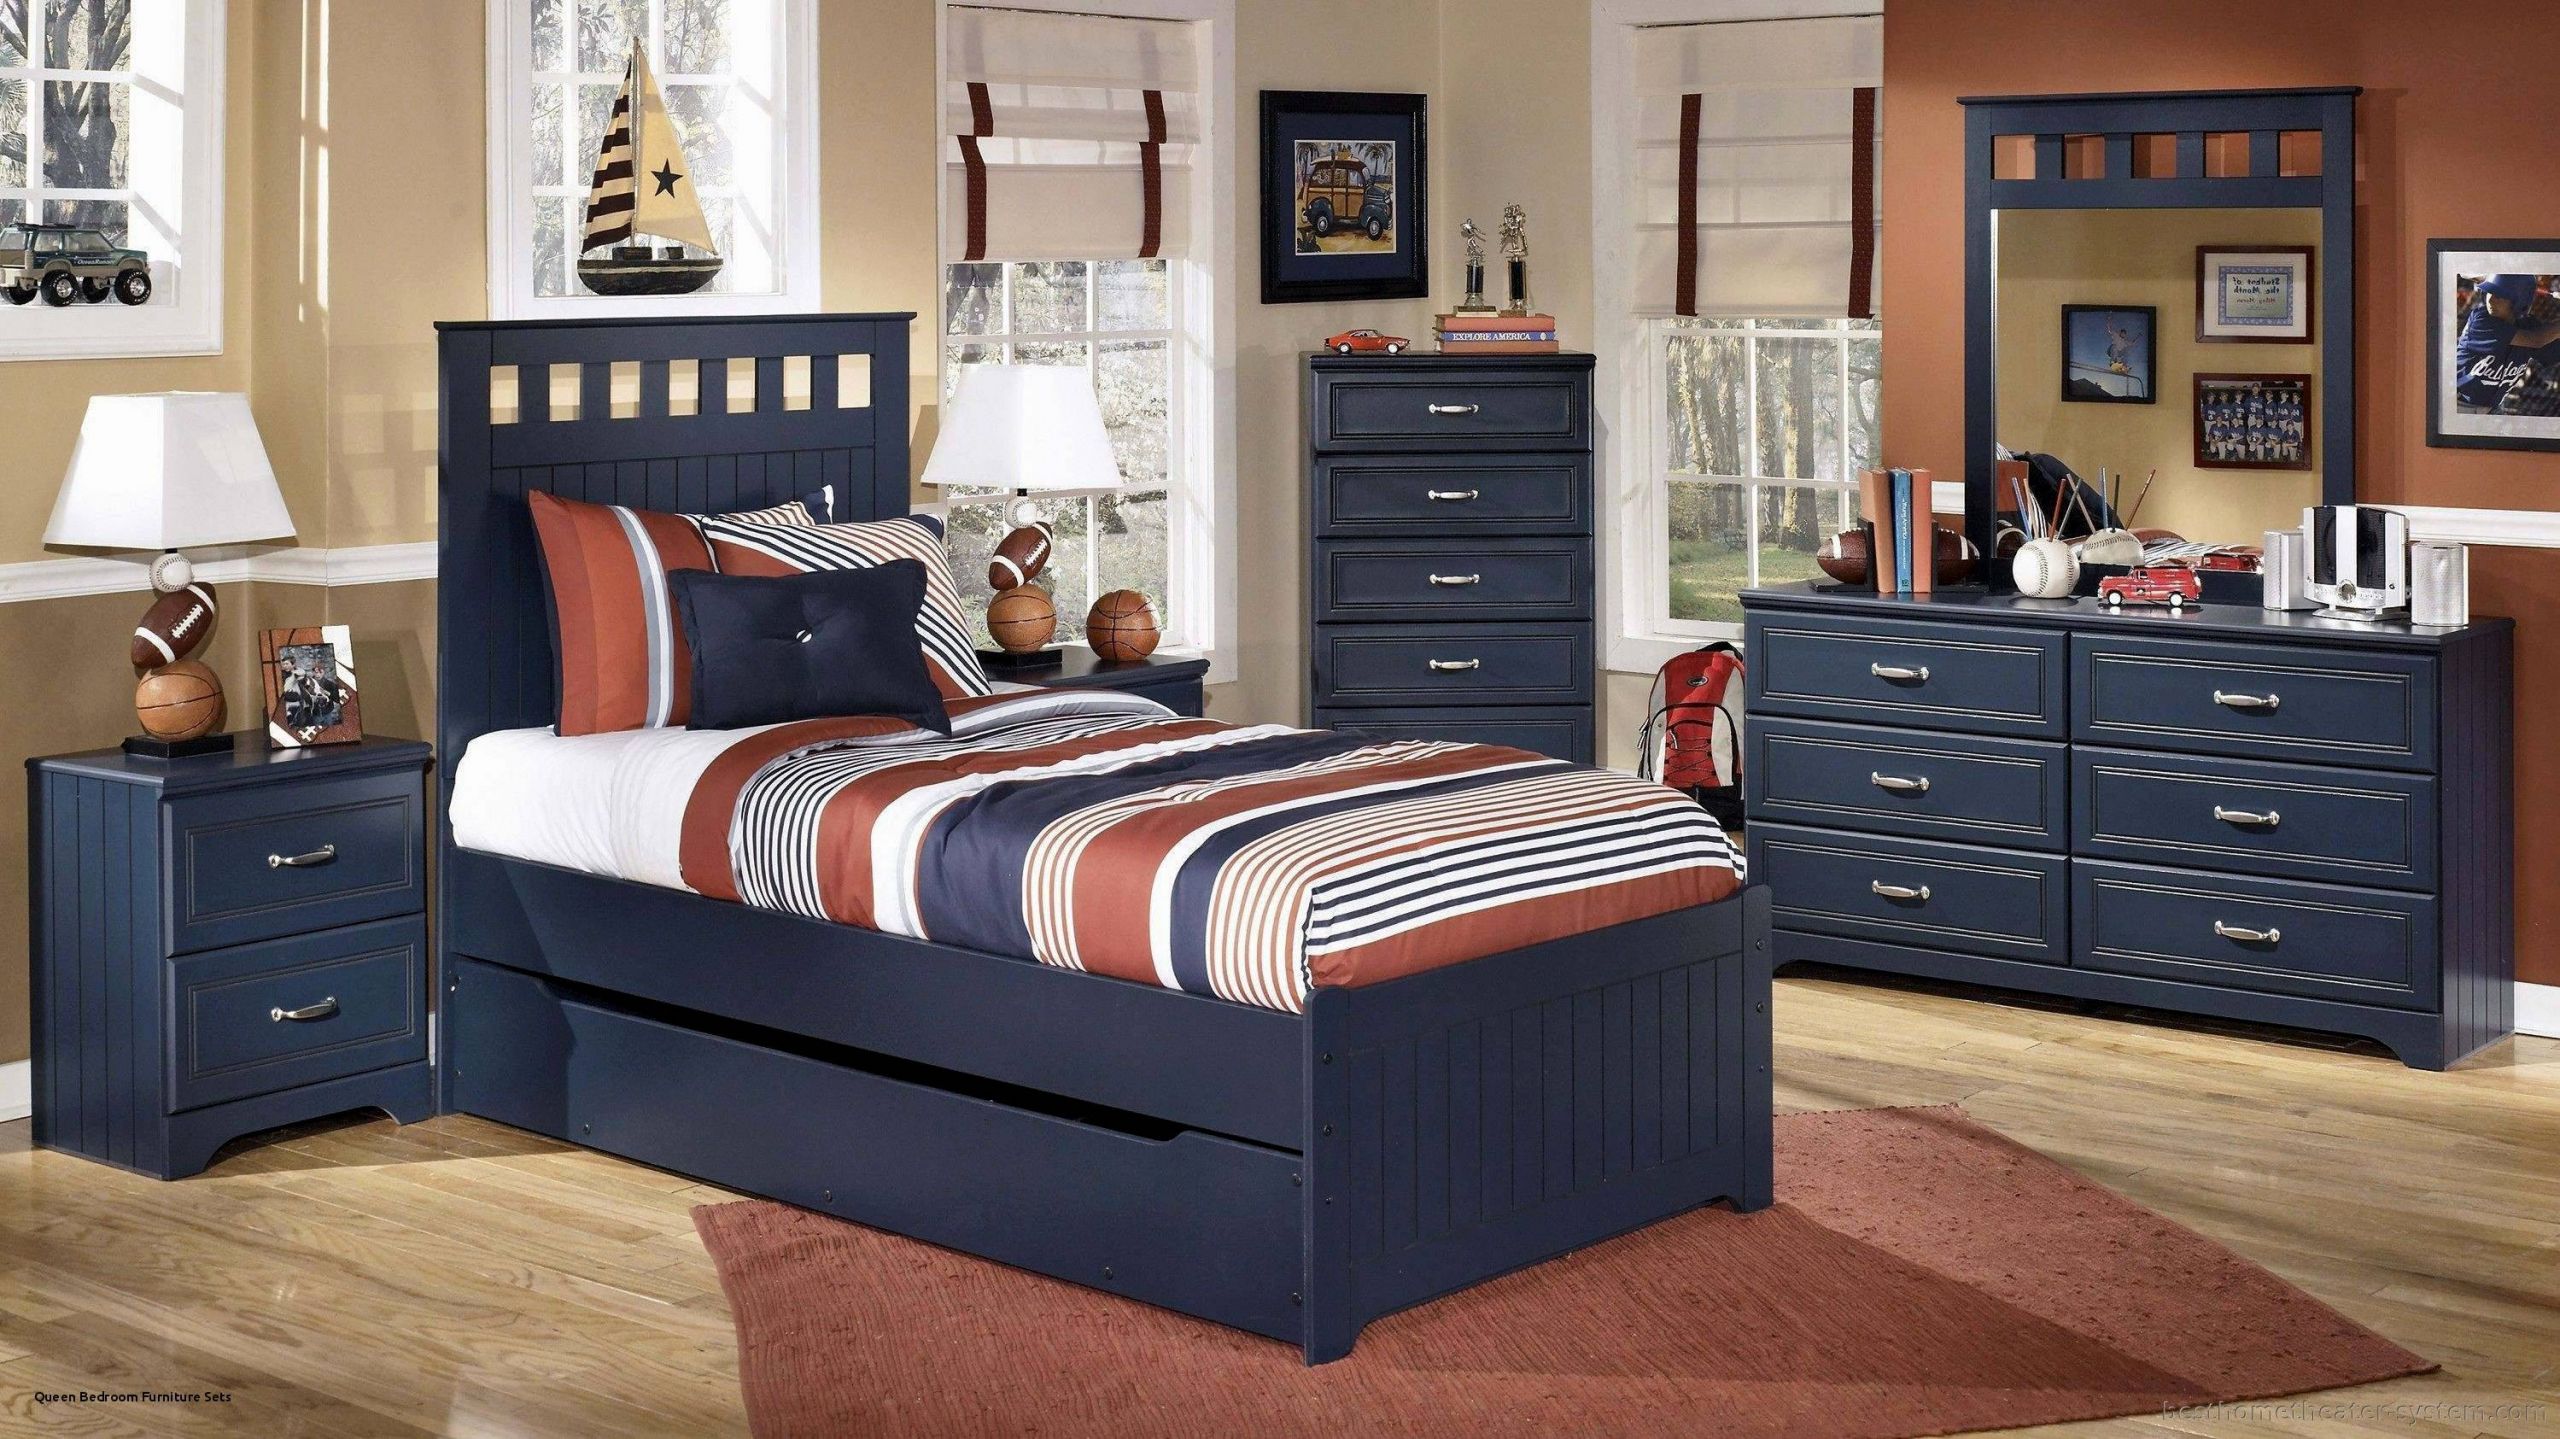 Small Bedroom With Queen Bed
 Small Bedroom with Queen Bed My Tech Your Web